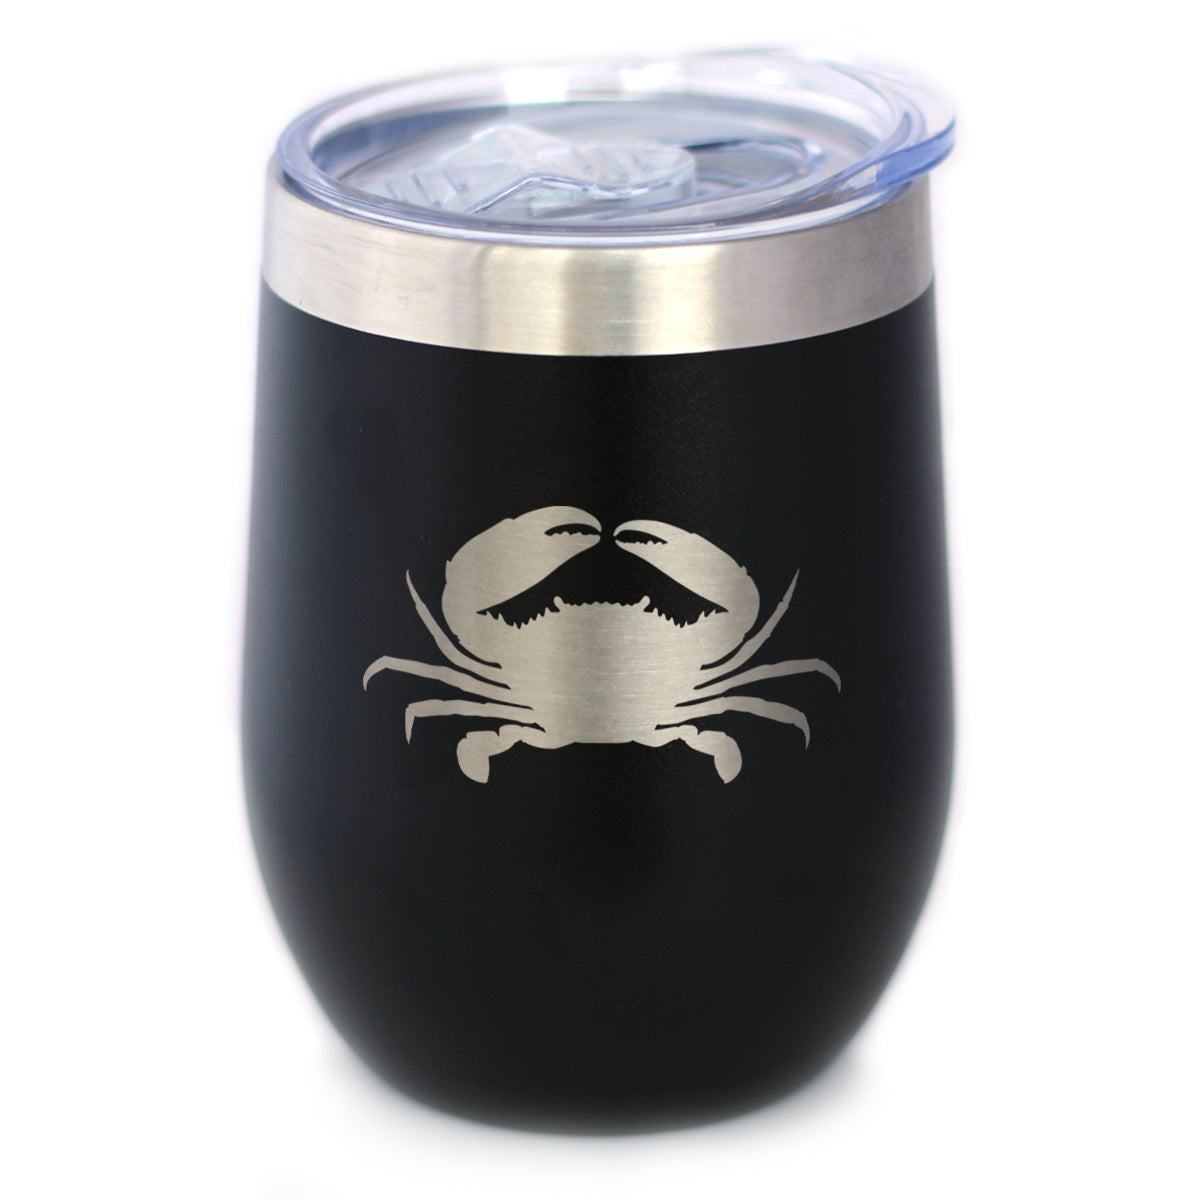 Crab Silhouette - Wine Tumbler Glass with Sliding Lid - Stainless Steel Insulated Mug - Crab Gifts and Decor for Women and Men